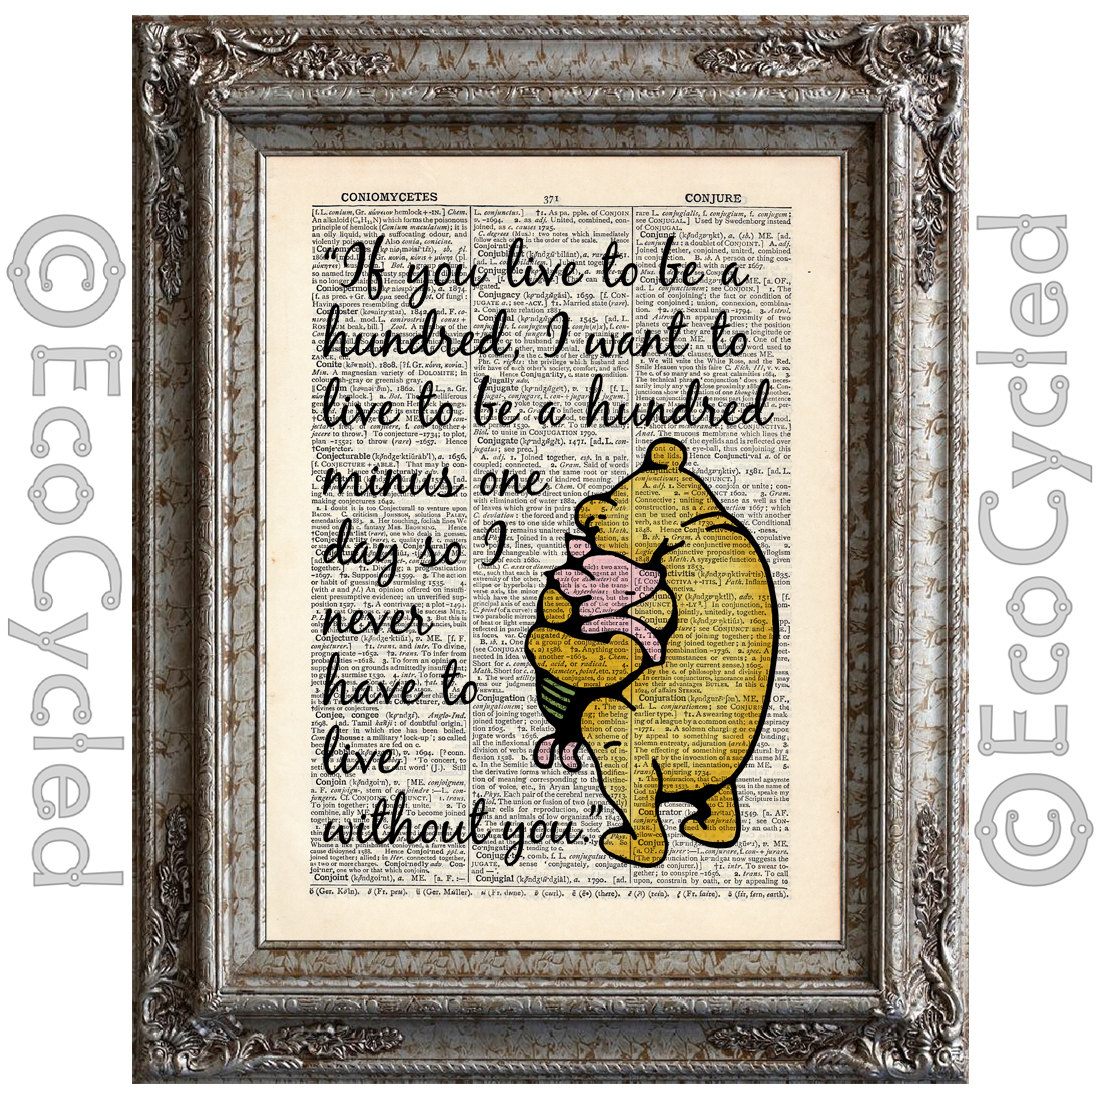 Love Quote Inspiring Family Quote If You Live to be 100 Winnie The Pooh Quote Downloadable Prints Downloadable Art Printable Art